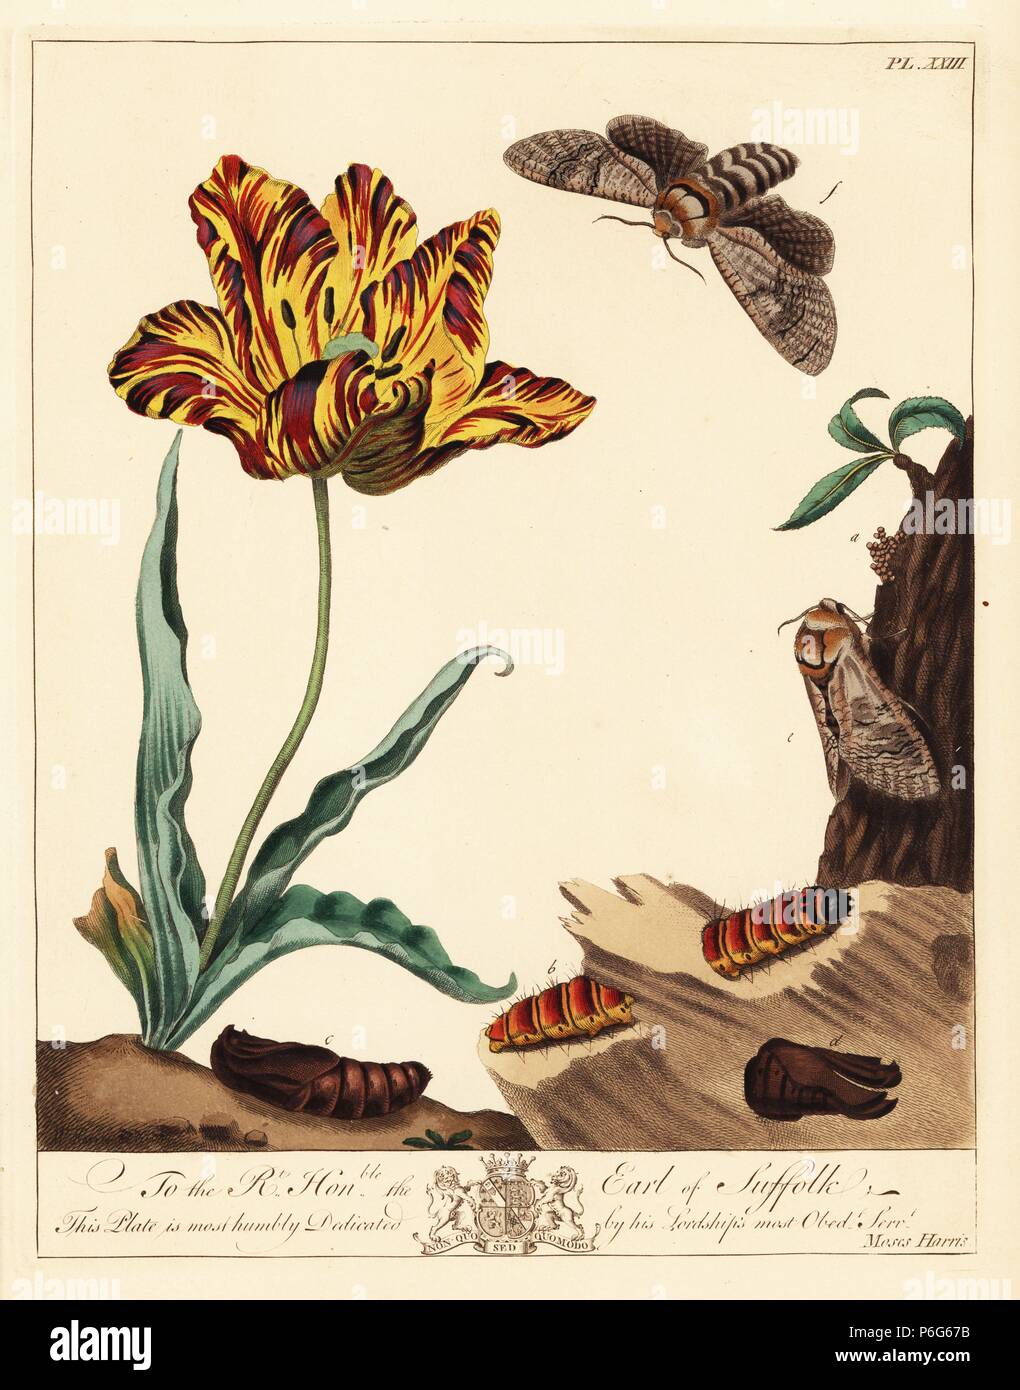 Goat moth, Cossus ligniperda, flying near a tulip while a caterpillar feeds on willow bark. Handcoloured lithograph after an illustration by Moses Harris from 'The Aurelian; a Natural History of English Moths and Butterflies,' new edition edited by J. O. Westwood, published by Henry Bohn, London, 1840. Stock Photo